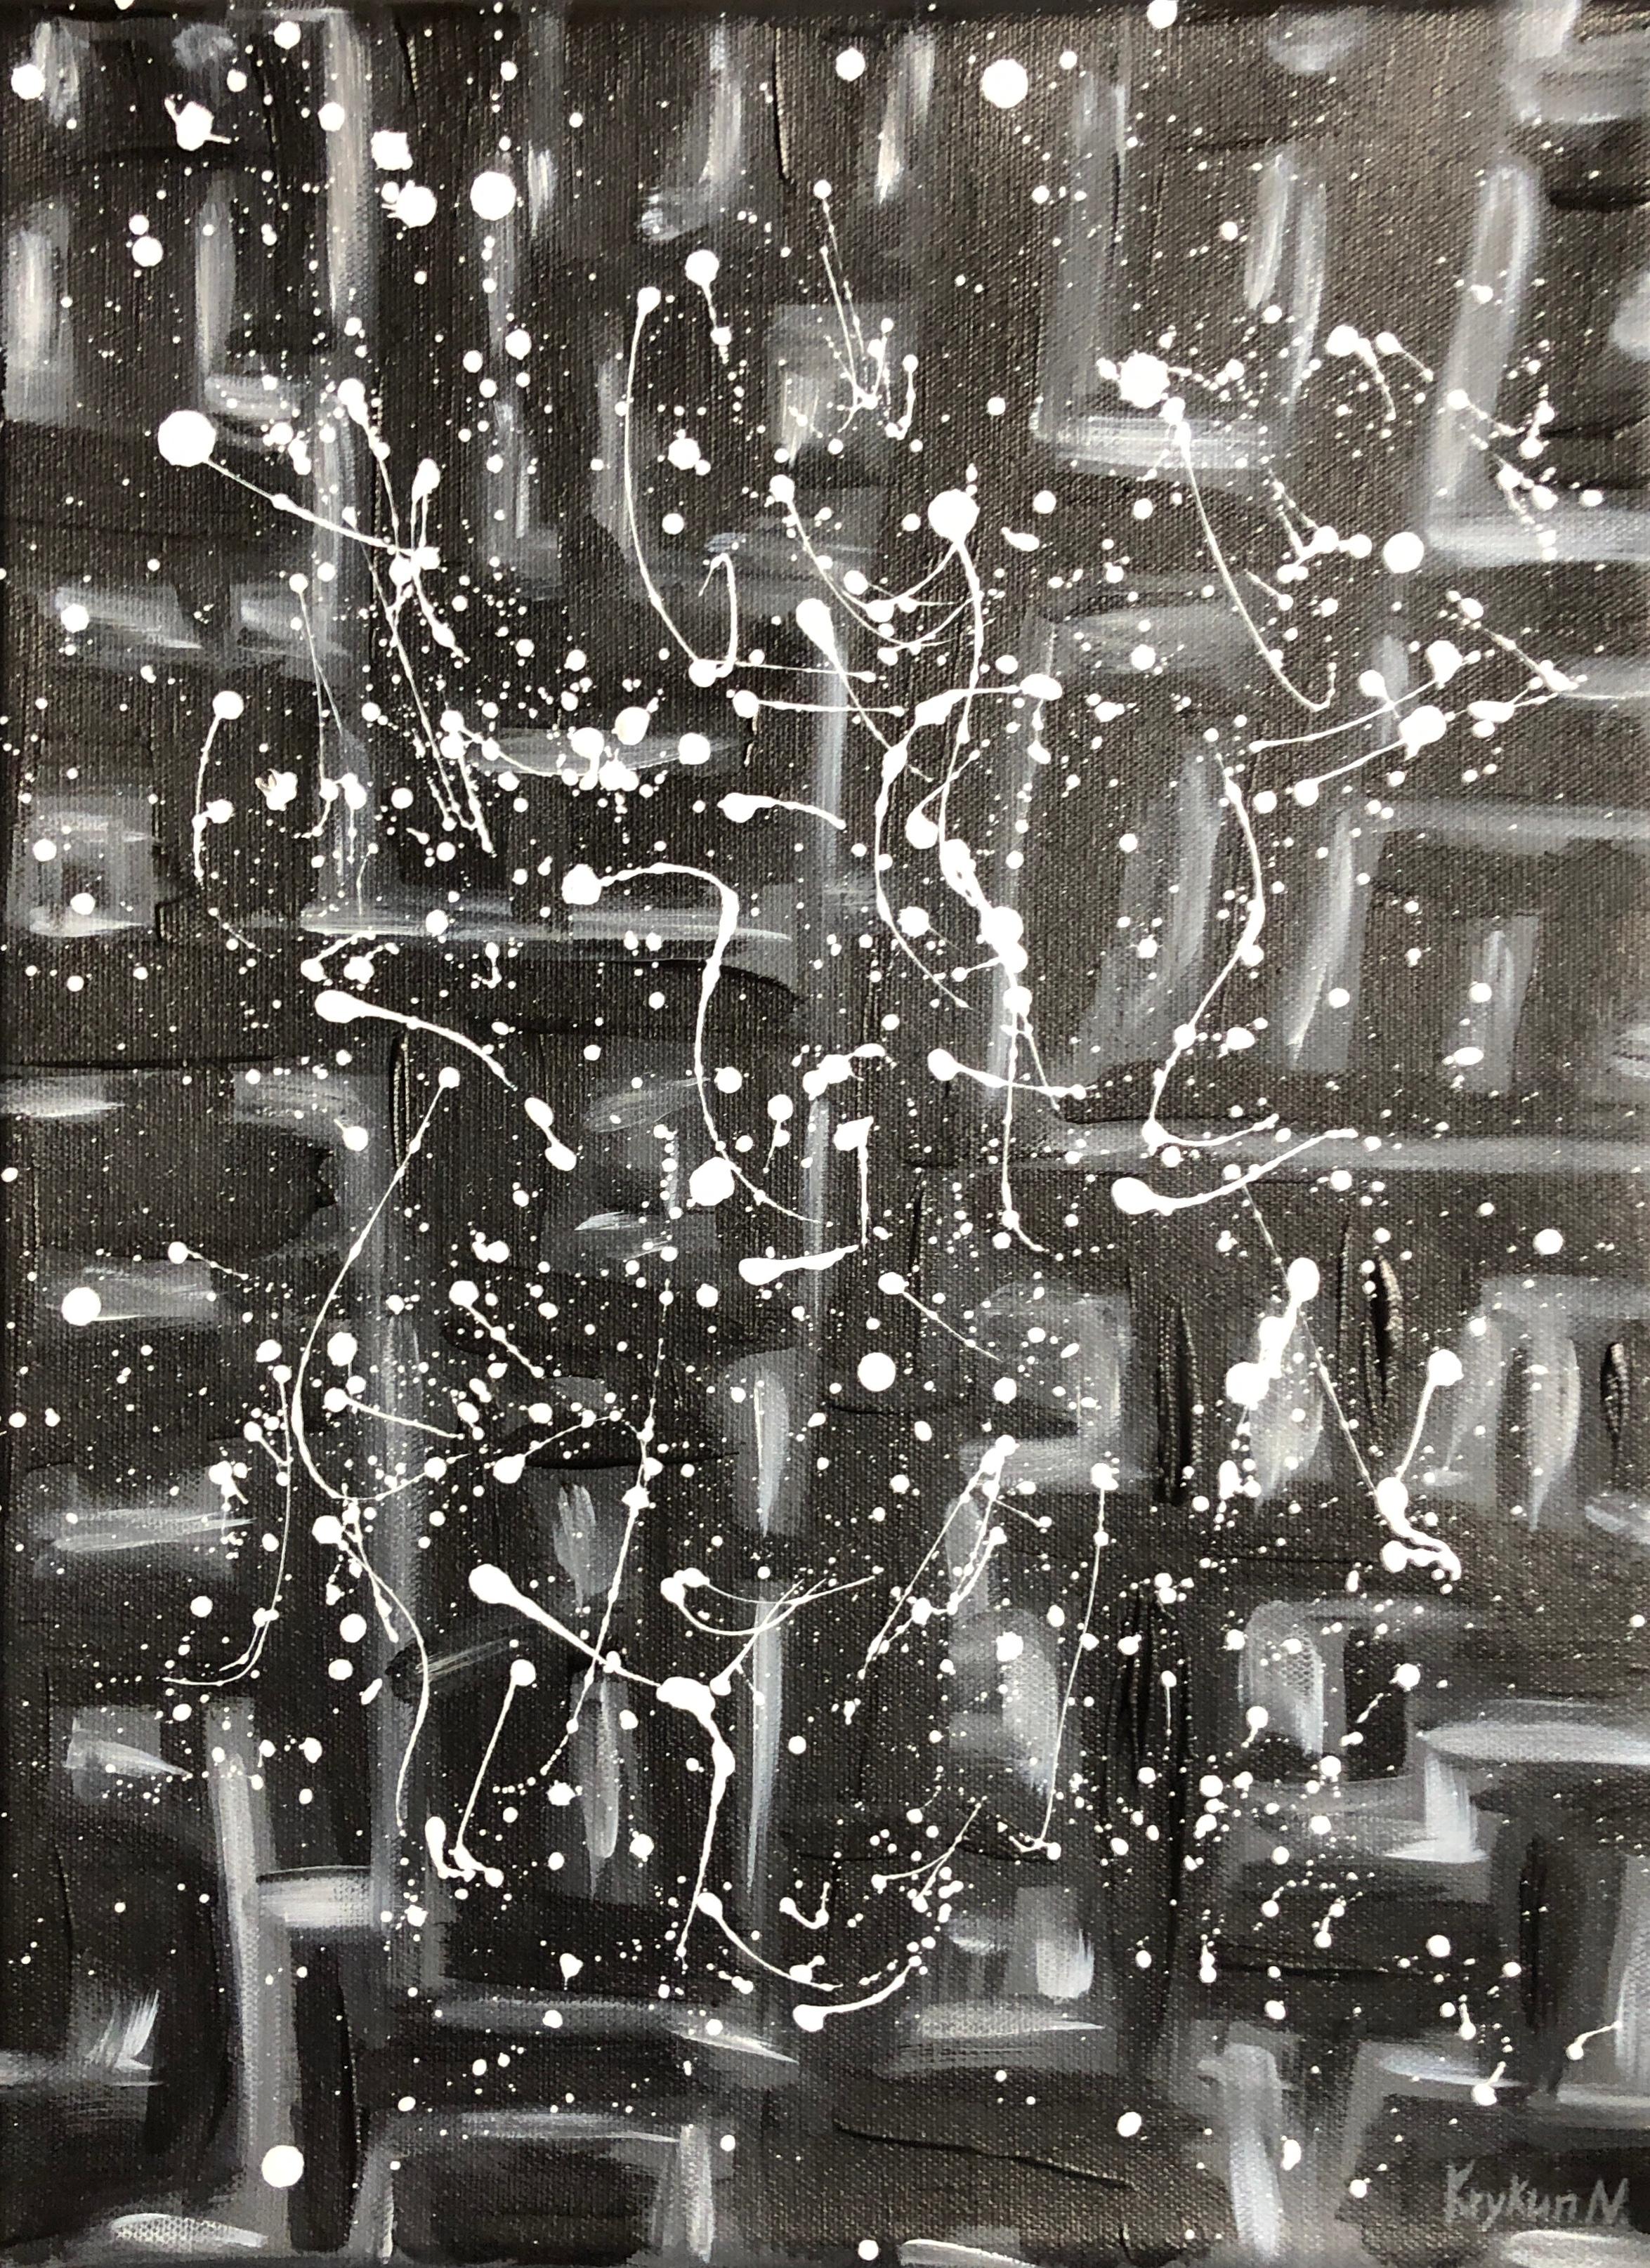 “Starry sky“ black and white abstraction dropping Pop Art